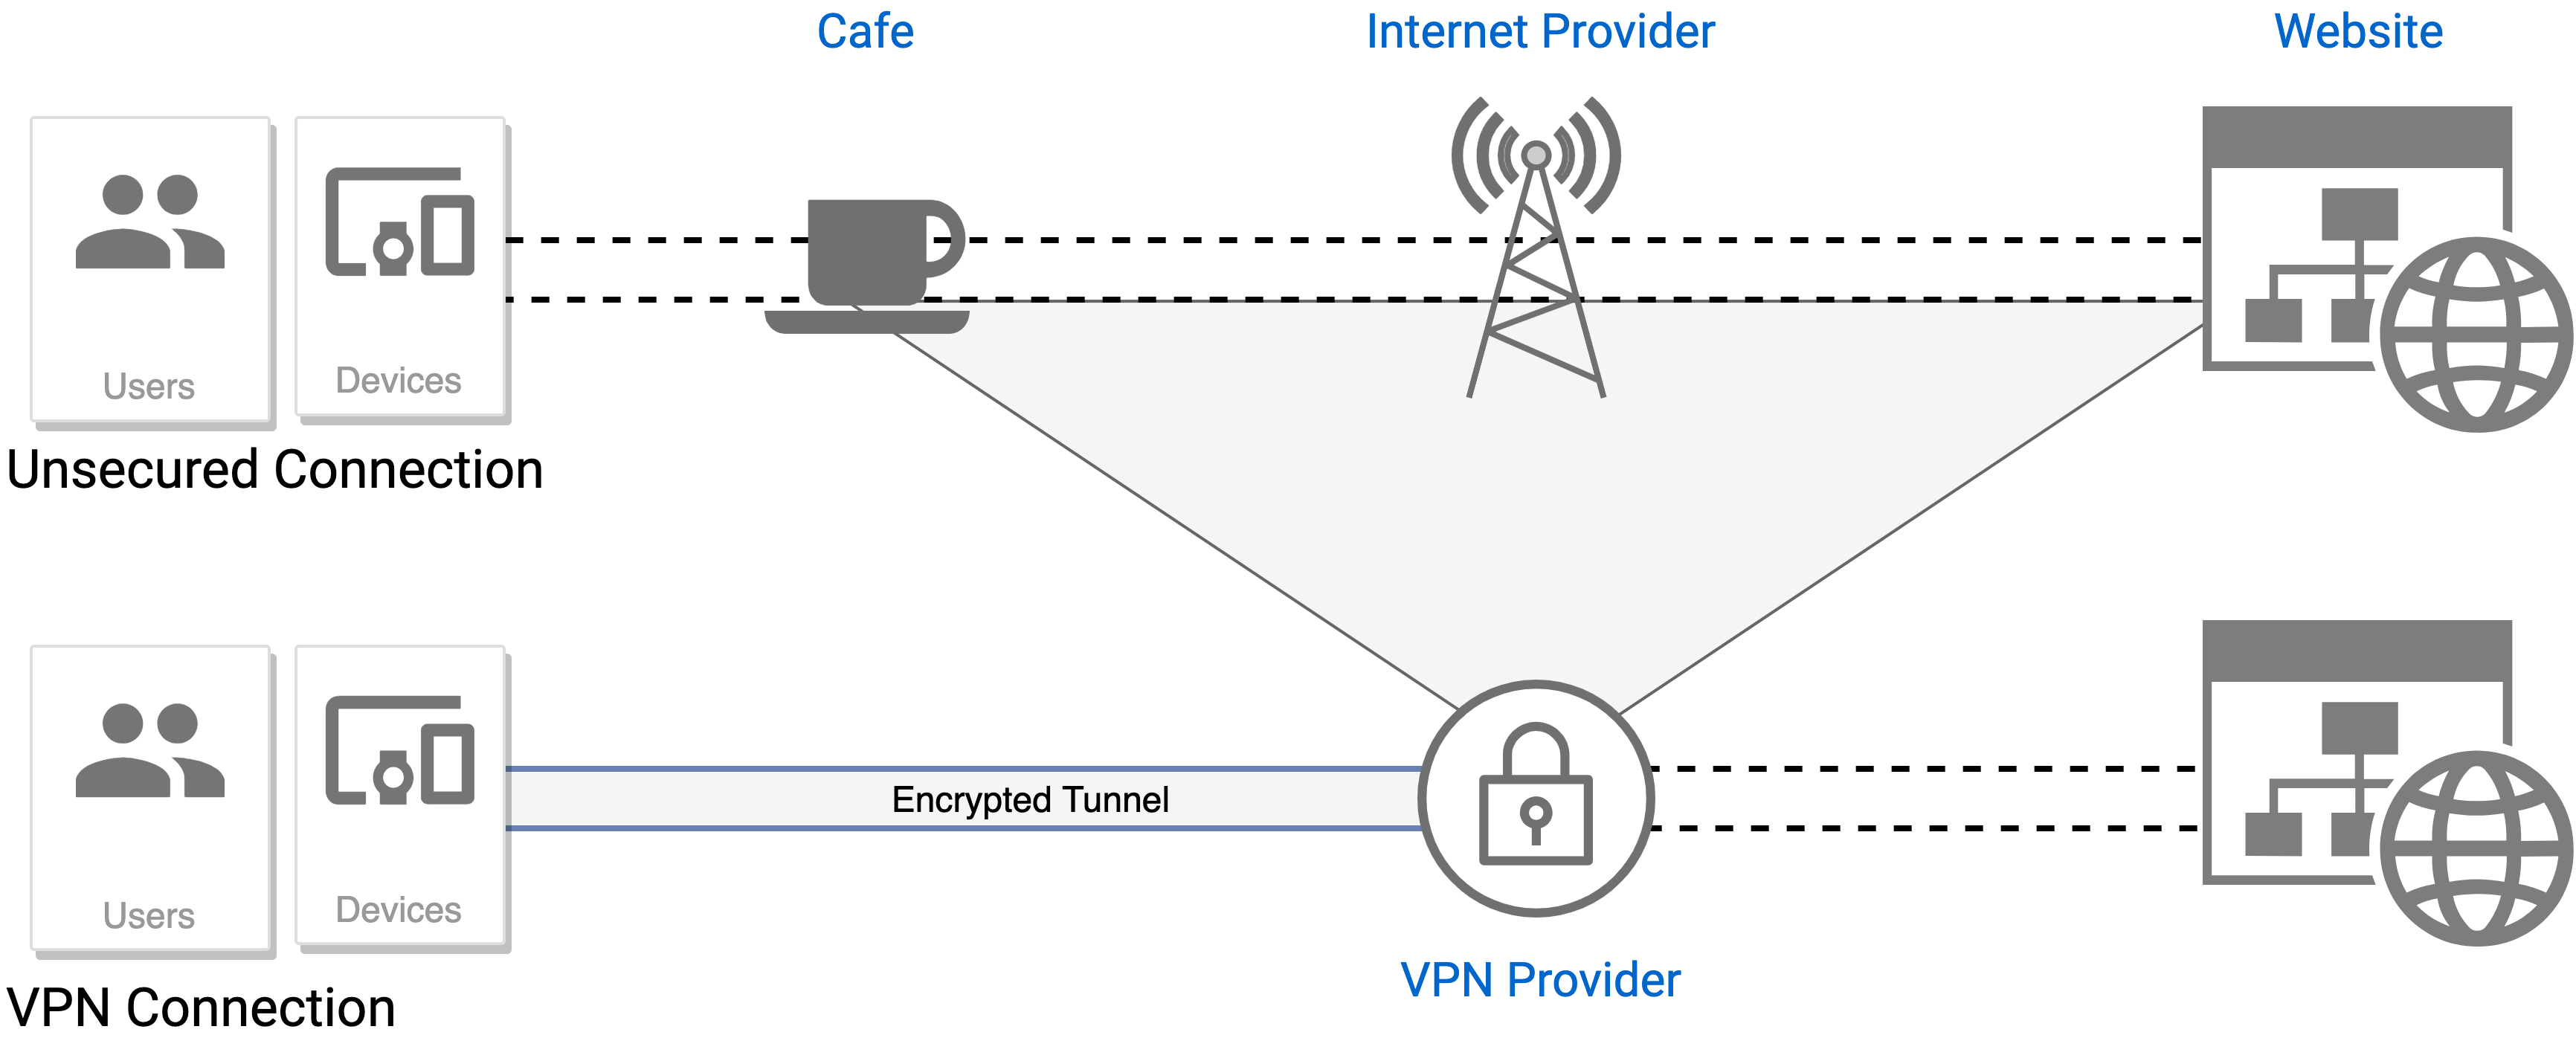 Unsecured connections v. VPN Connections